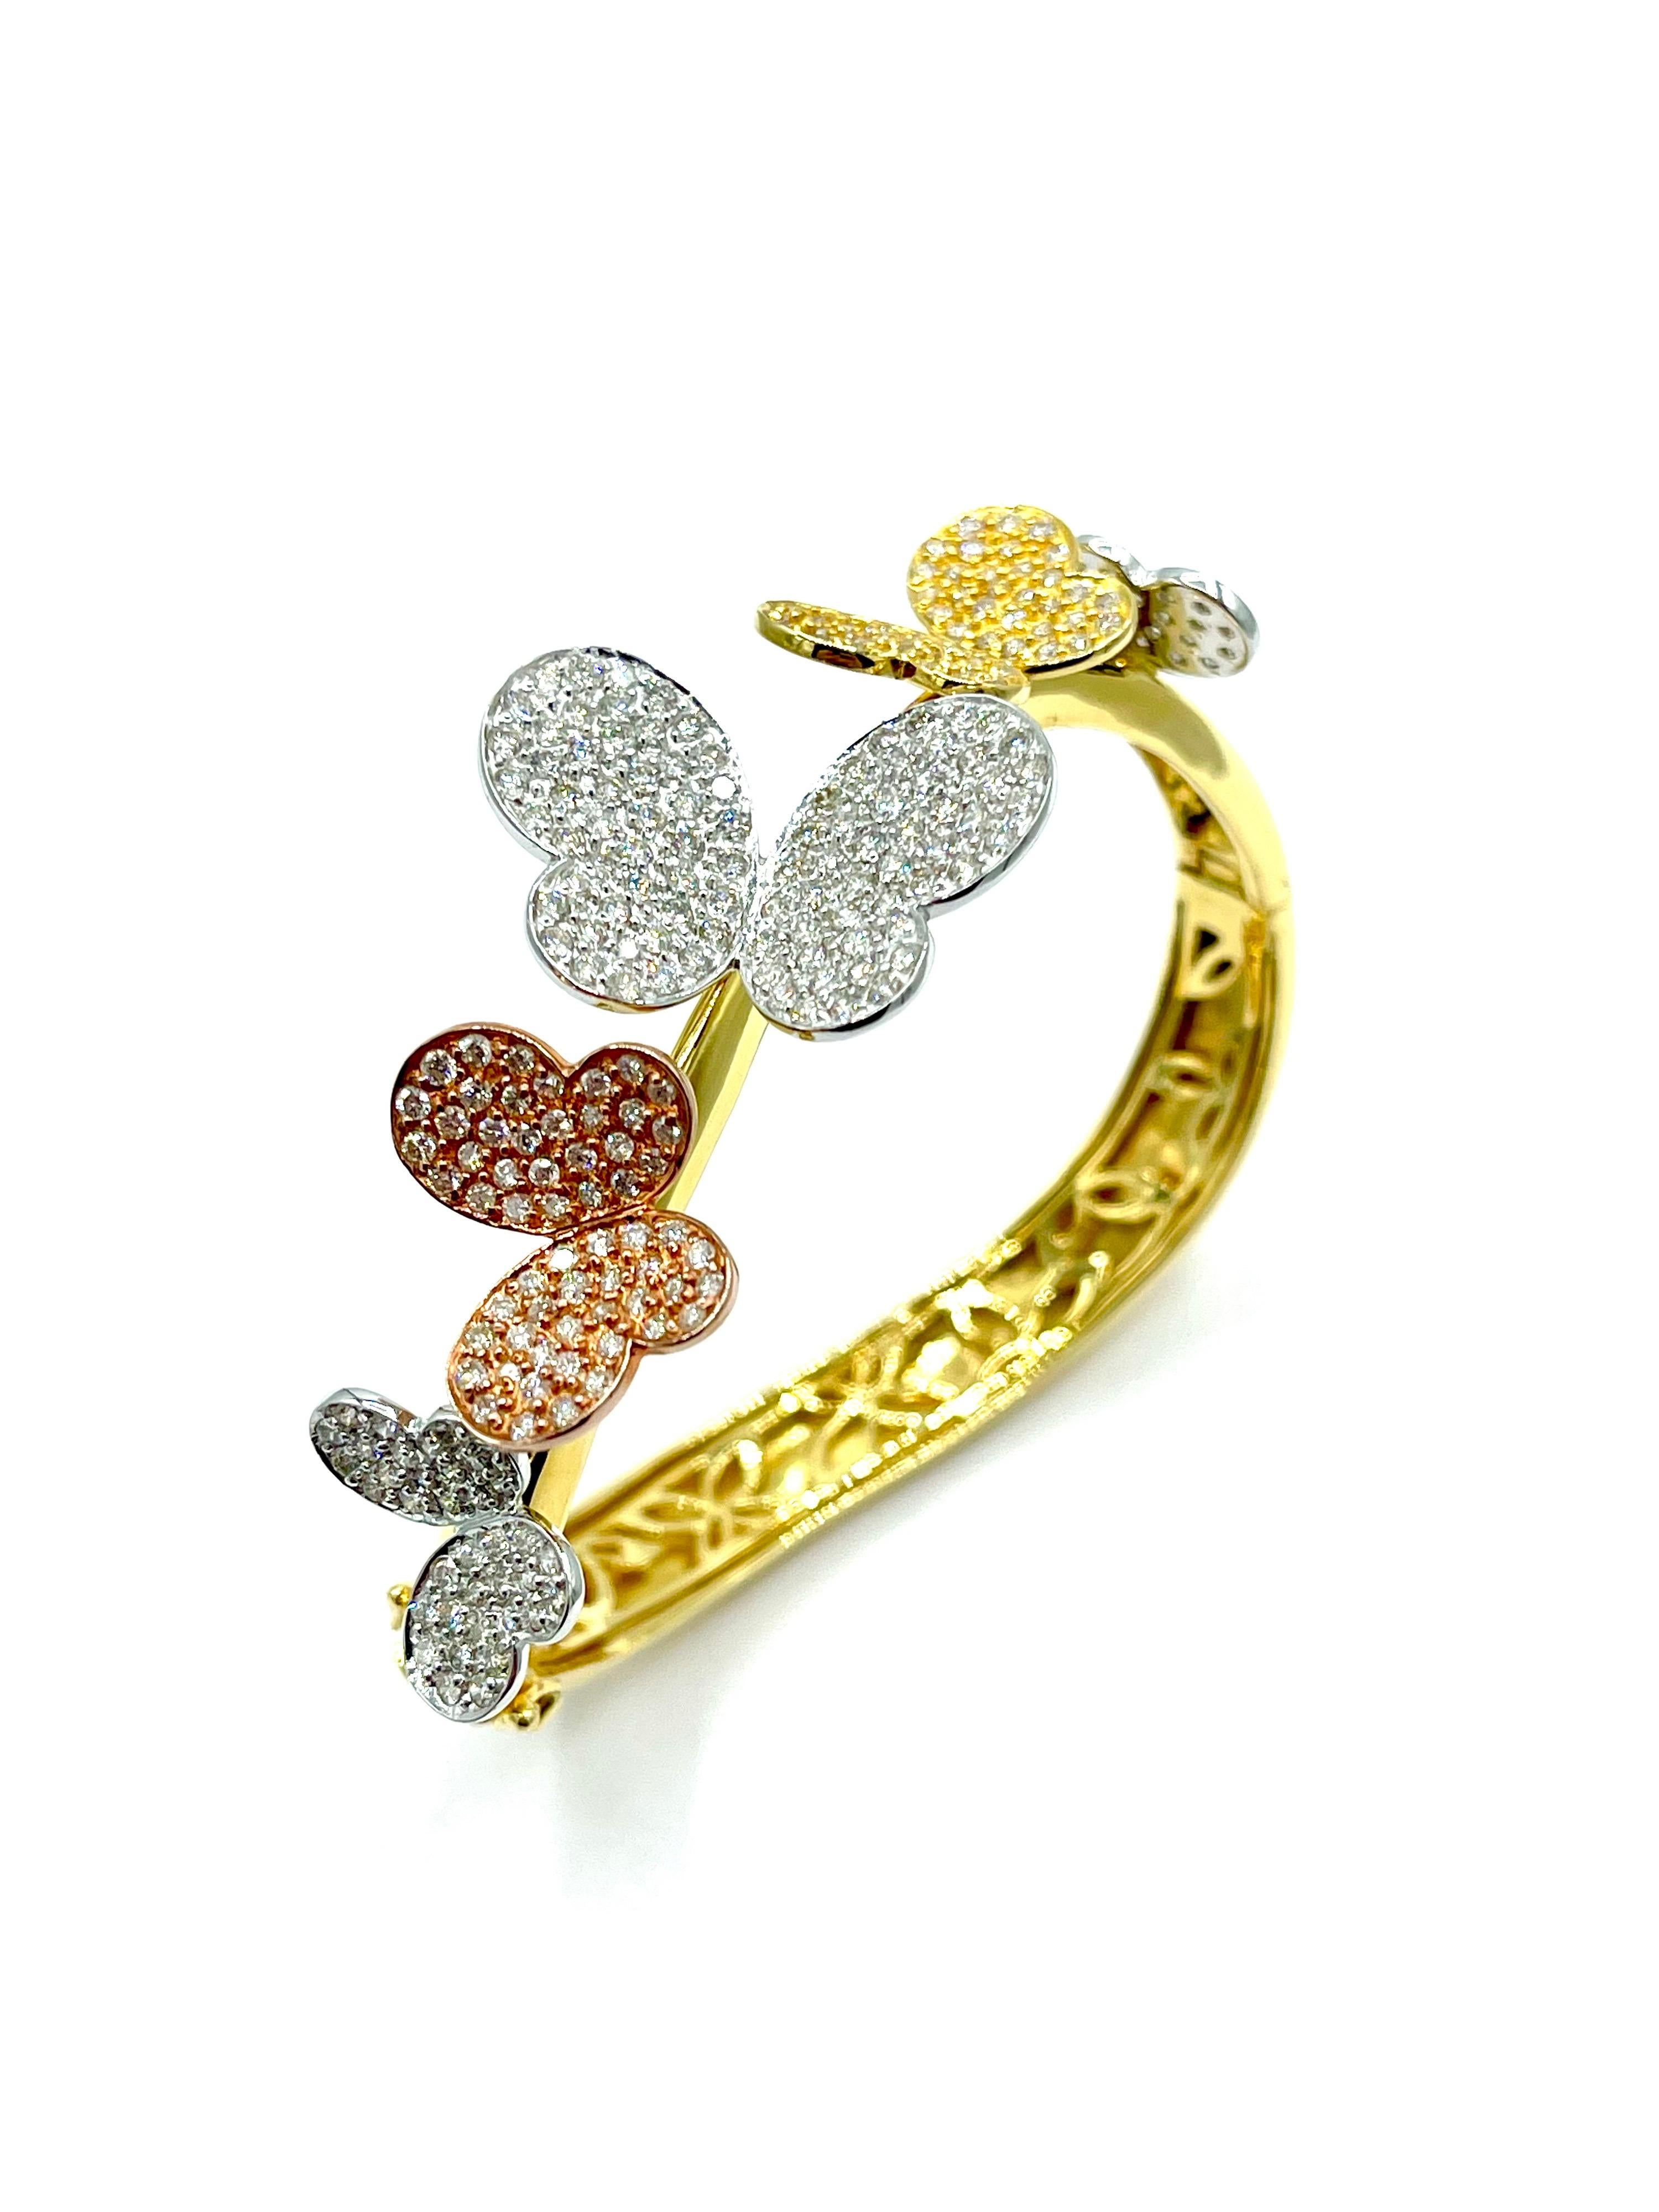 Such a whimsical bracelet to accessorize with!  The 3.00 carats in round brilliant Diamonds are pave set into five separate butterflies on the top half of the bracelet.  The butterflies are made in 18K white gold, rose gold, and yellow gold, with